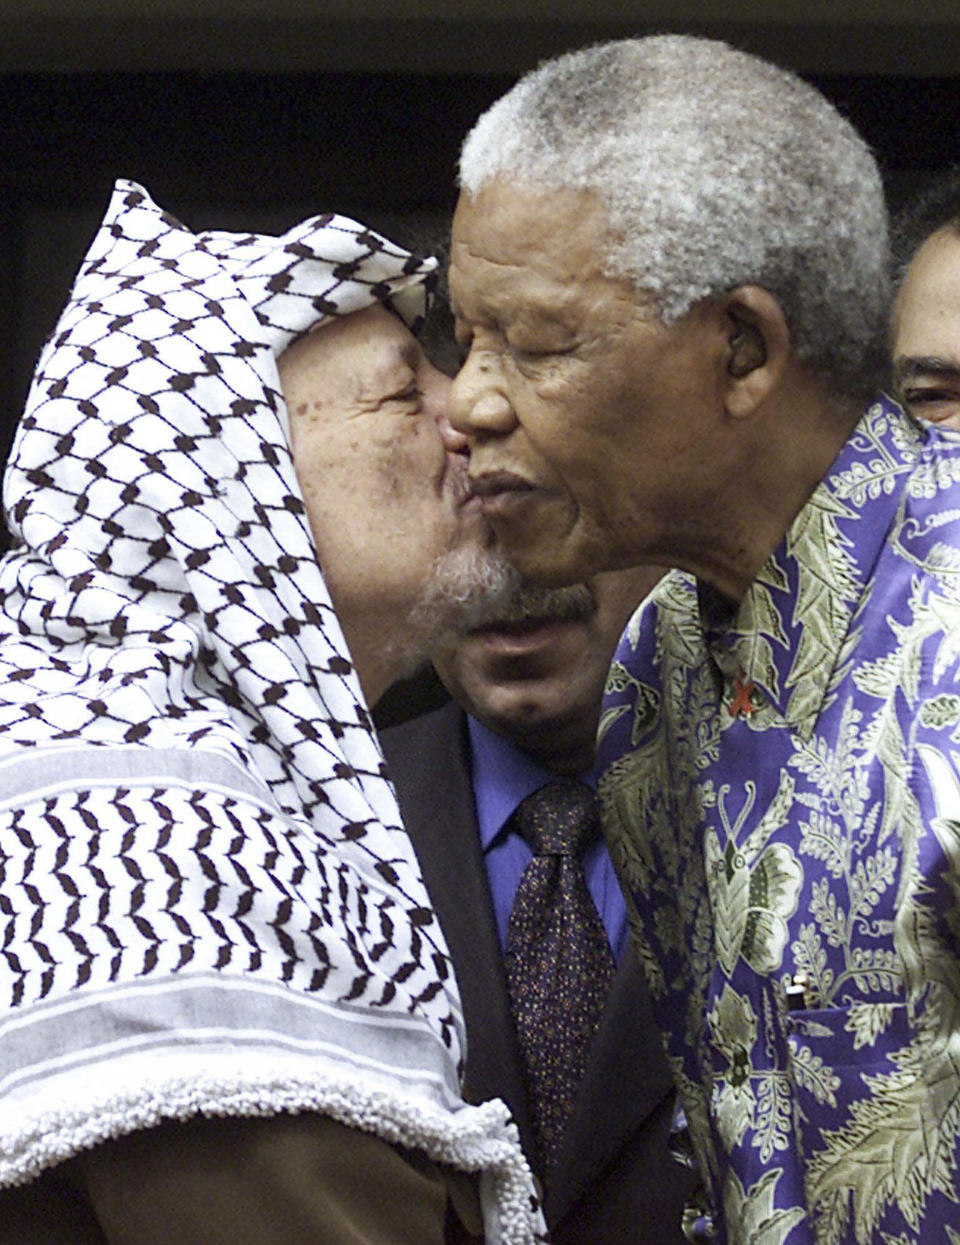 FILE — Late Palestinian leader Yasser Arafat, left, embraces the late former South Africa President Nelson Mandela, right, at a meeting in Johannesburg Thursday May 3, 2001. South Africa's long-held support for the Palestinian people can be traced back to the time of Mandela and Arafat with the two leaders believing that the struggle for freedom by Blacks in apartheid South Africa and Palestinians in Gaza and the West Bank were the same. (AP Photo/Denis Farrell, File)